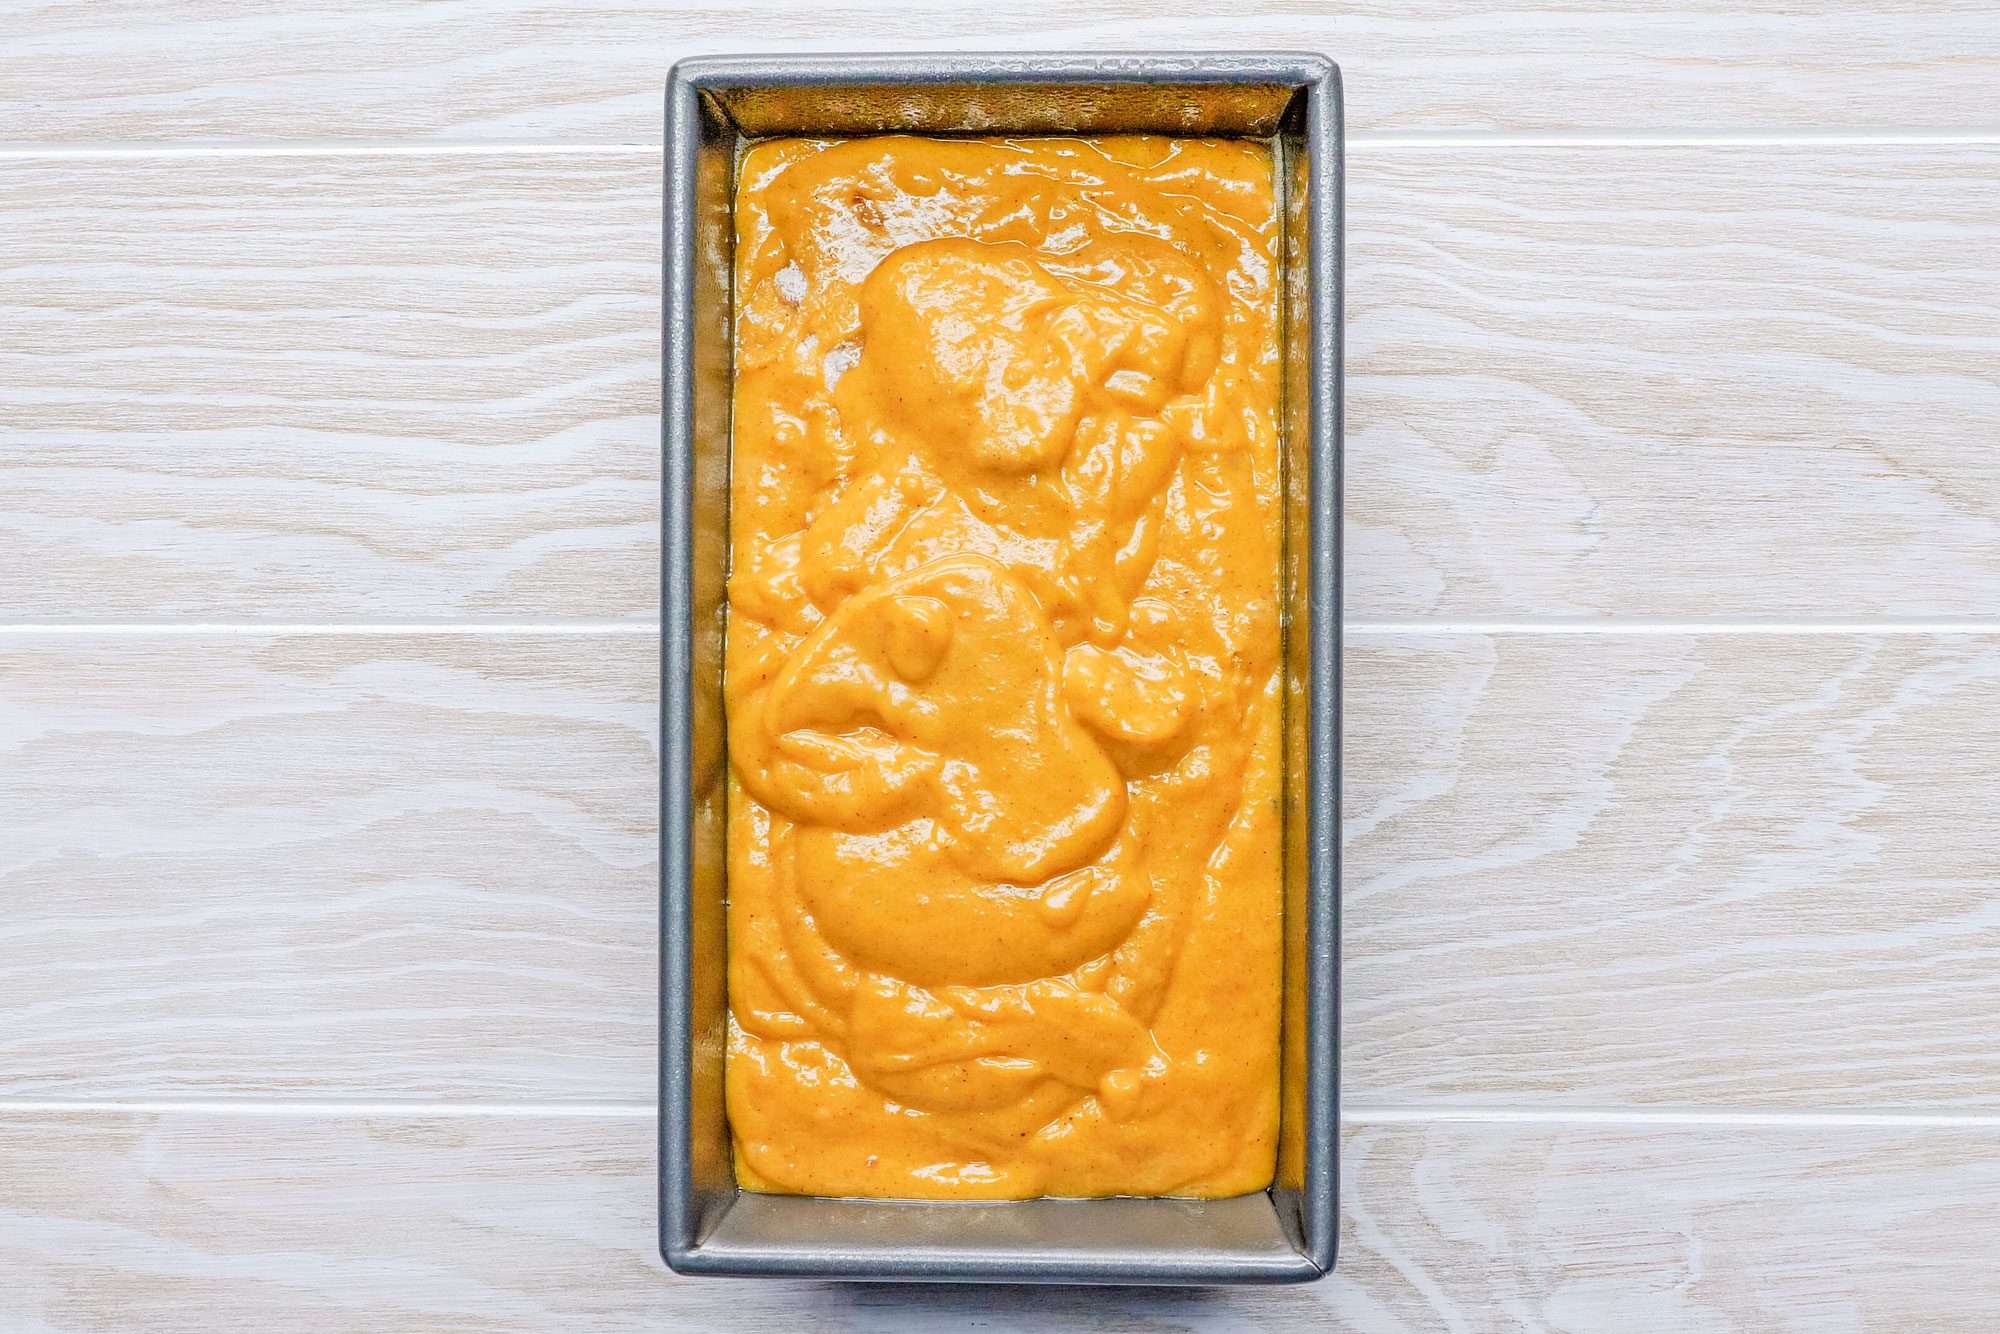 Pumpkin Bread Batter in a Loaf Pan Ready to Bake on Wooden Surface